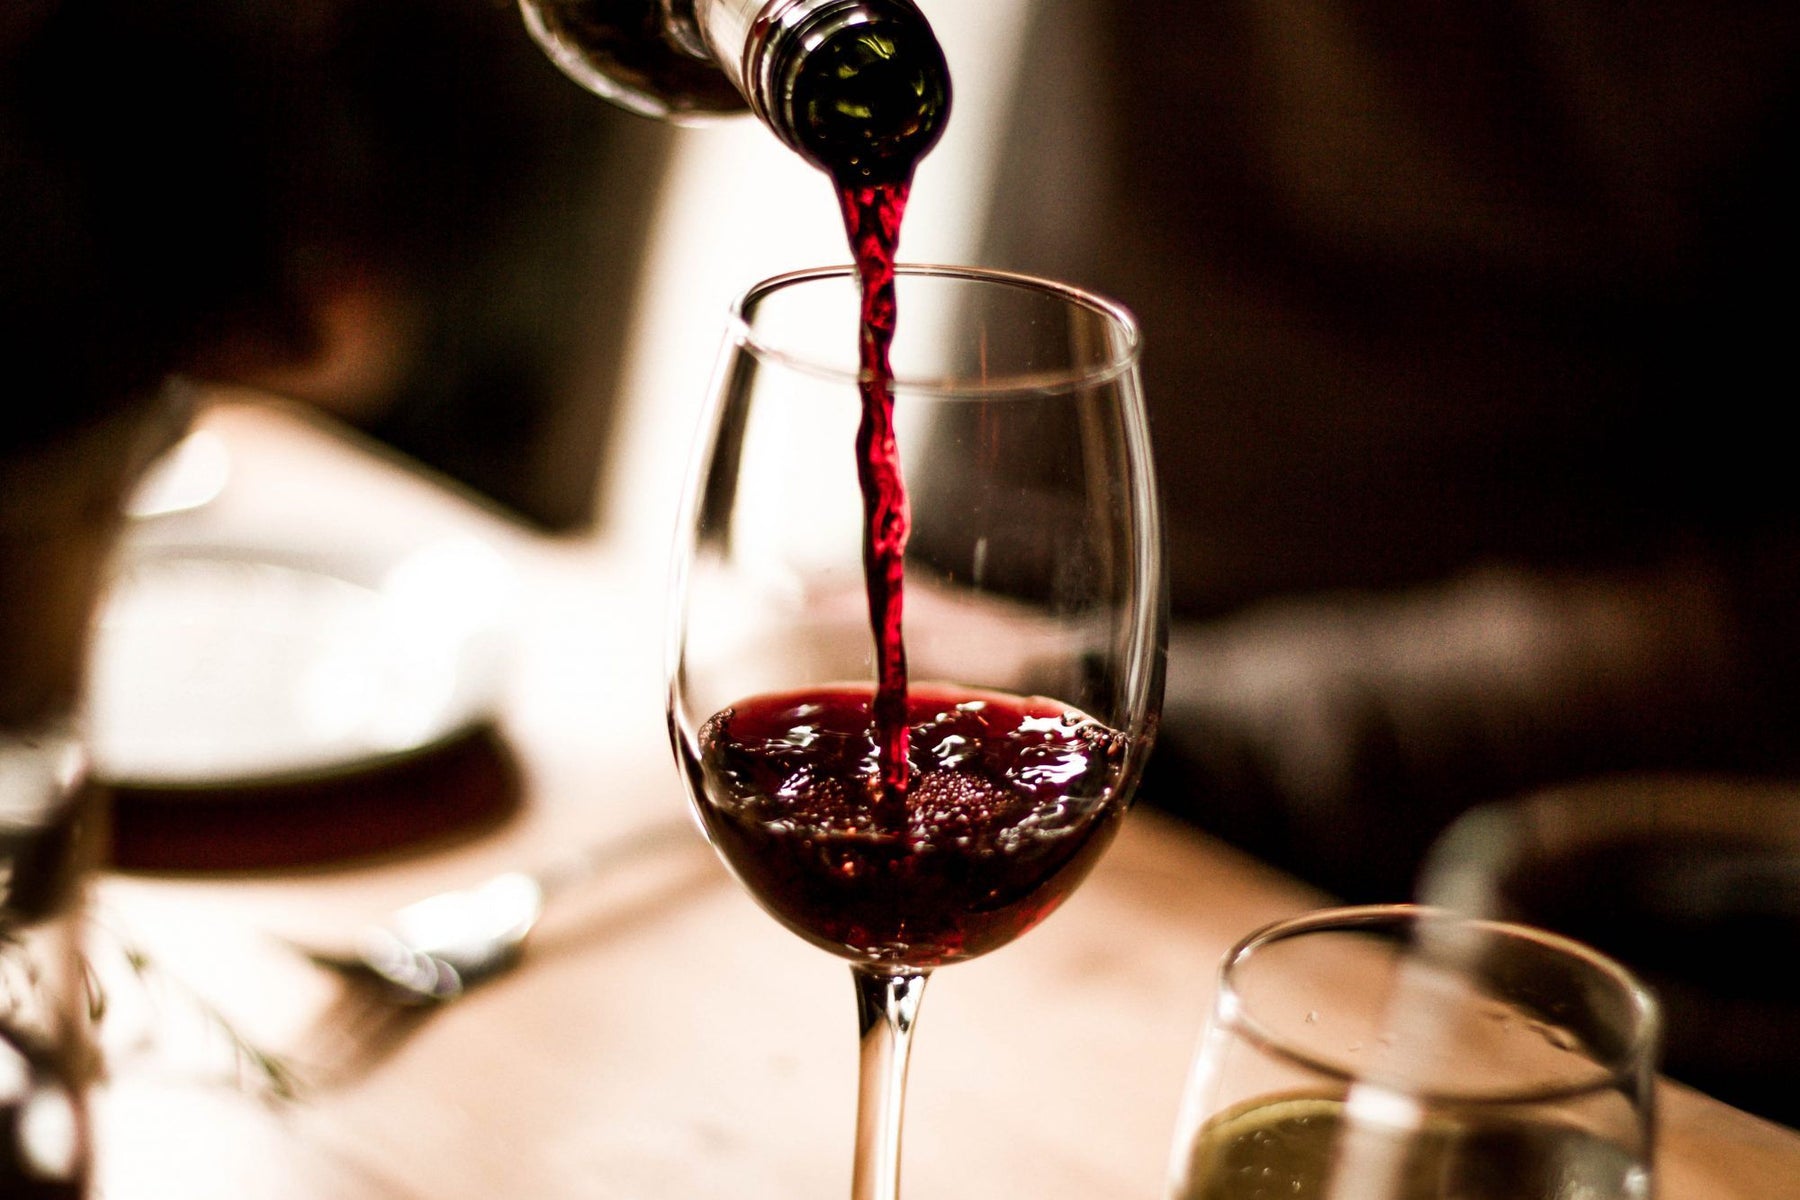 What Are Tannins In Wine?